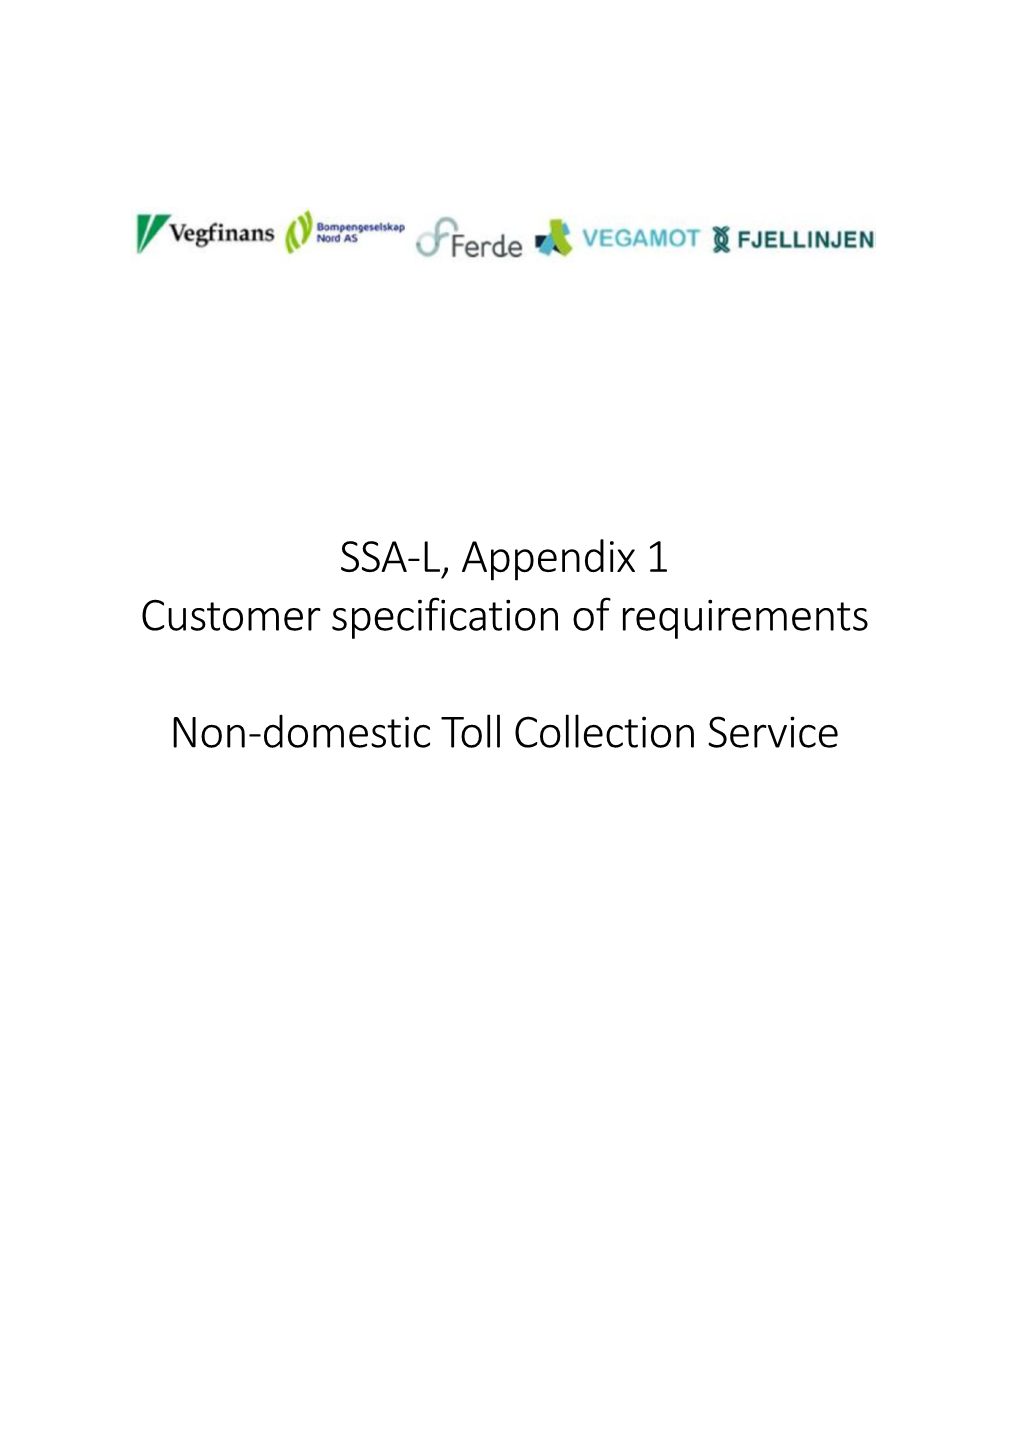 SSA-L Appendix 1 Customer Specification of Requirements